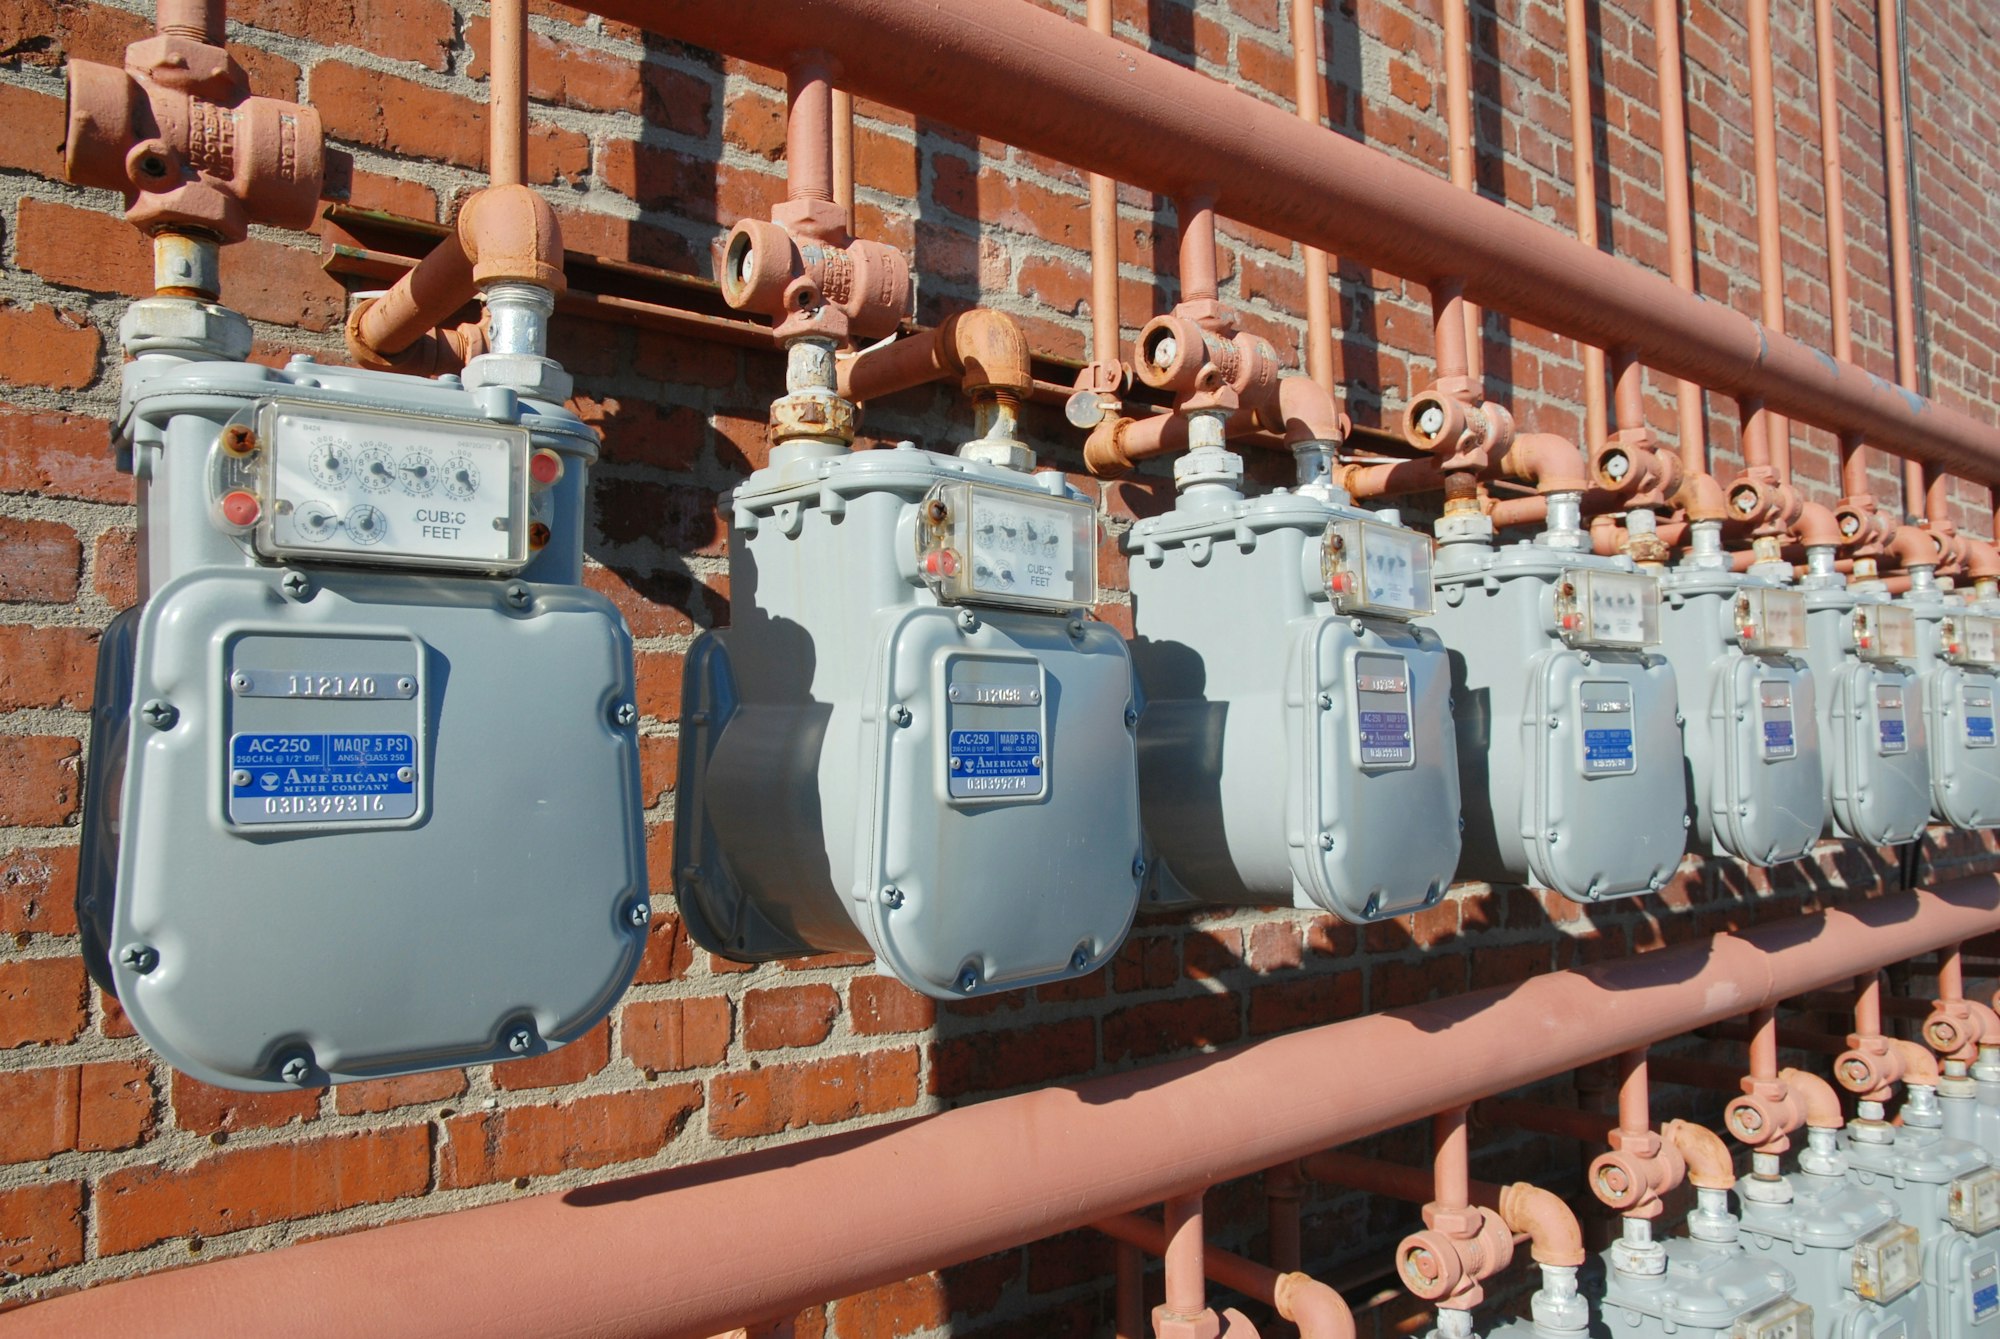 a row of electrical meters mounted to a brick wall